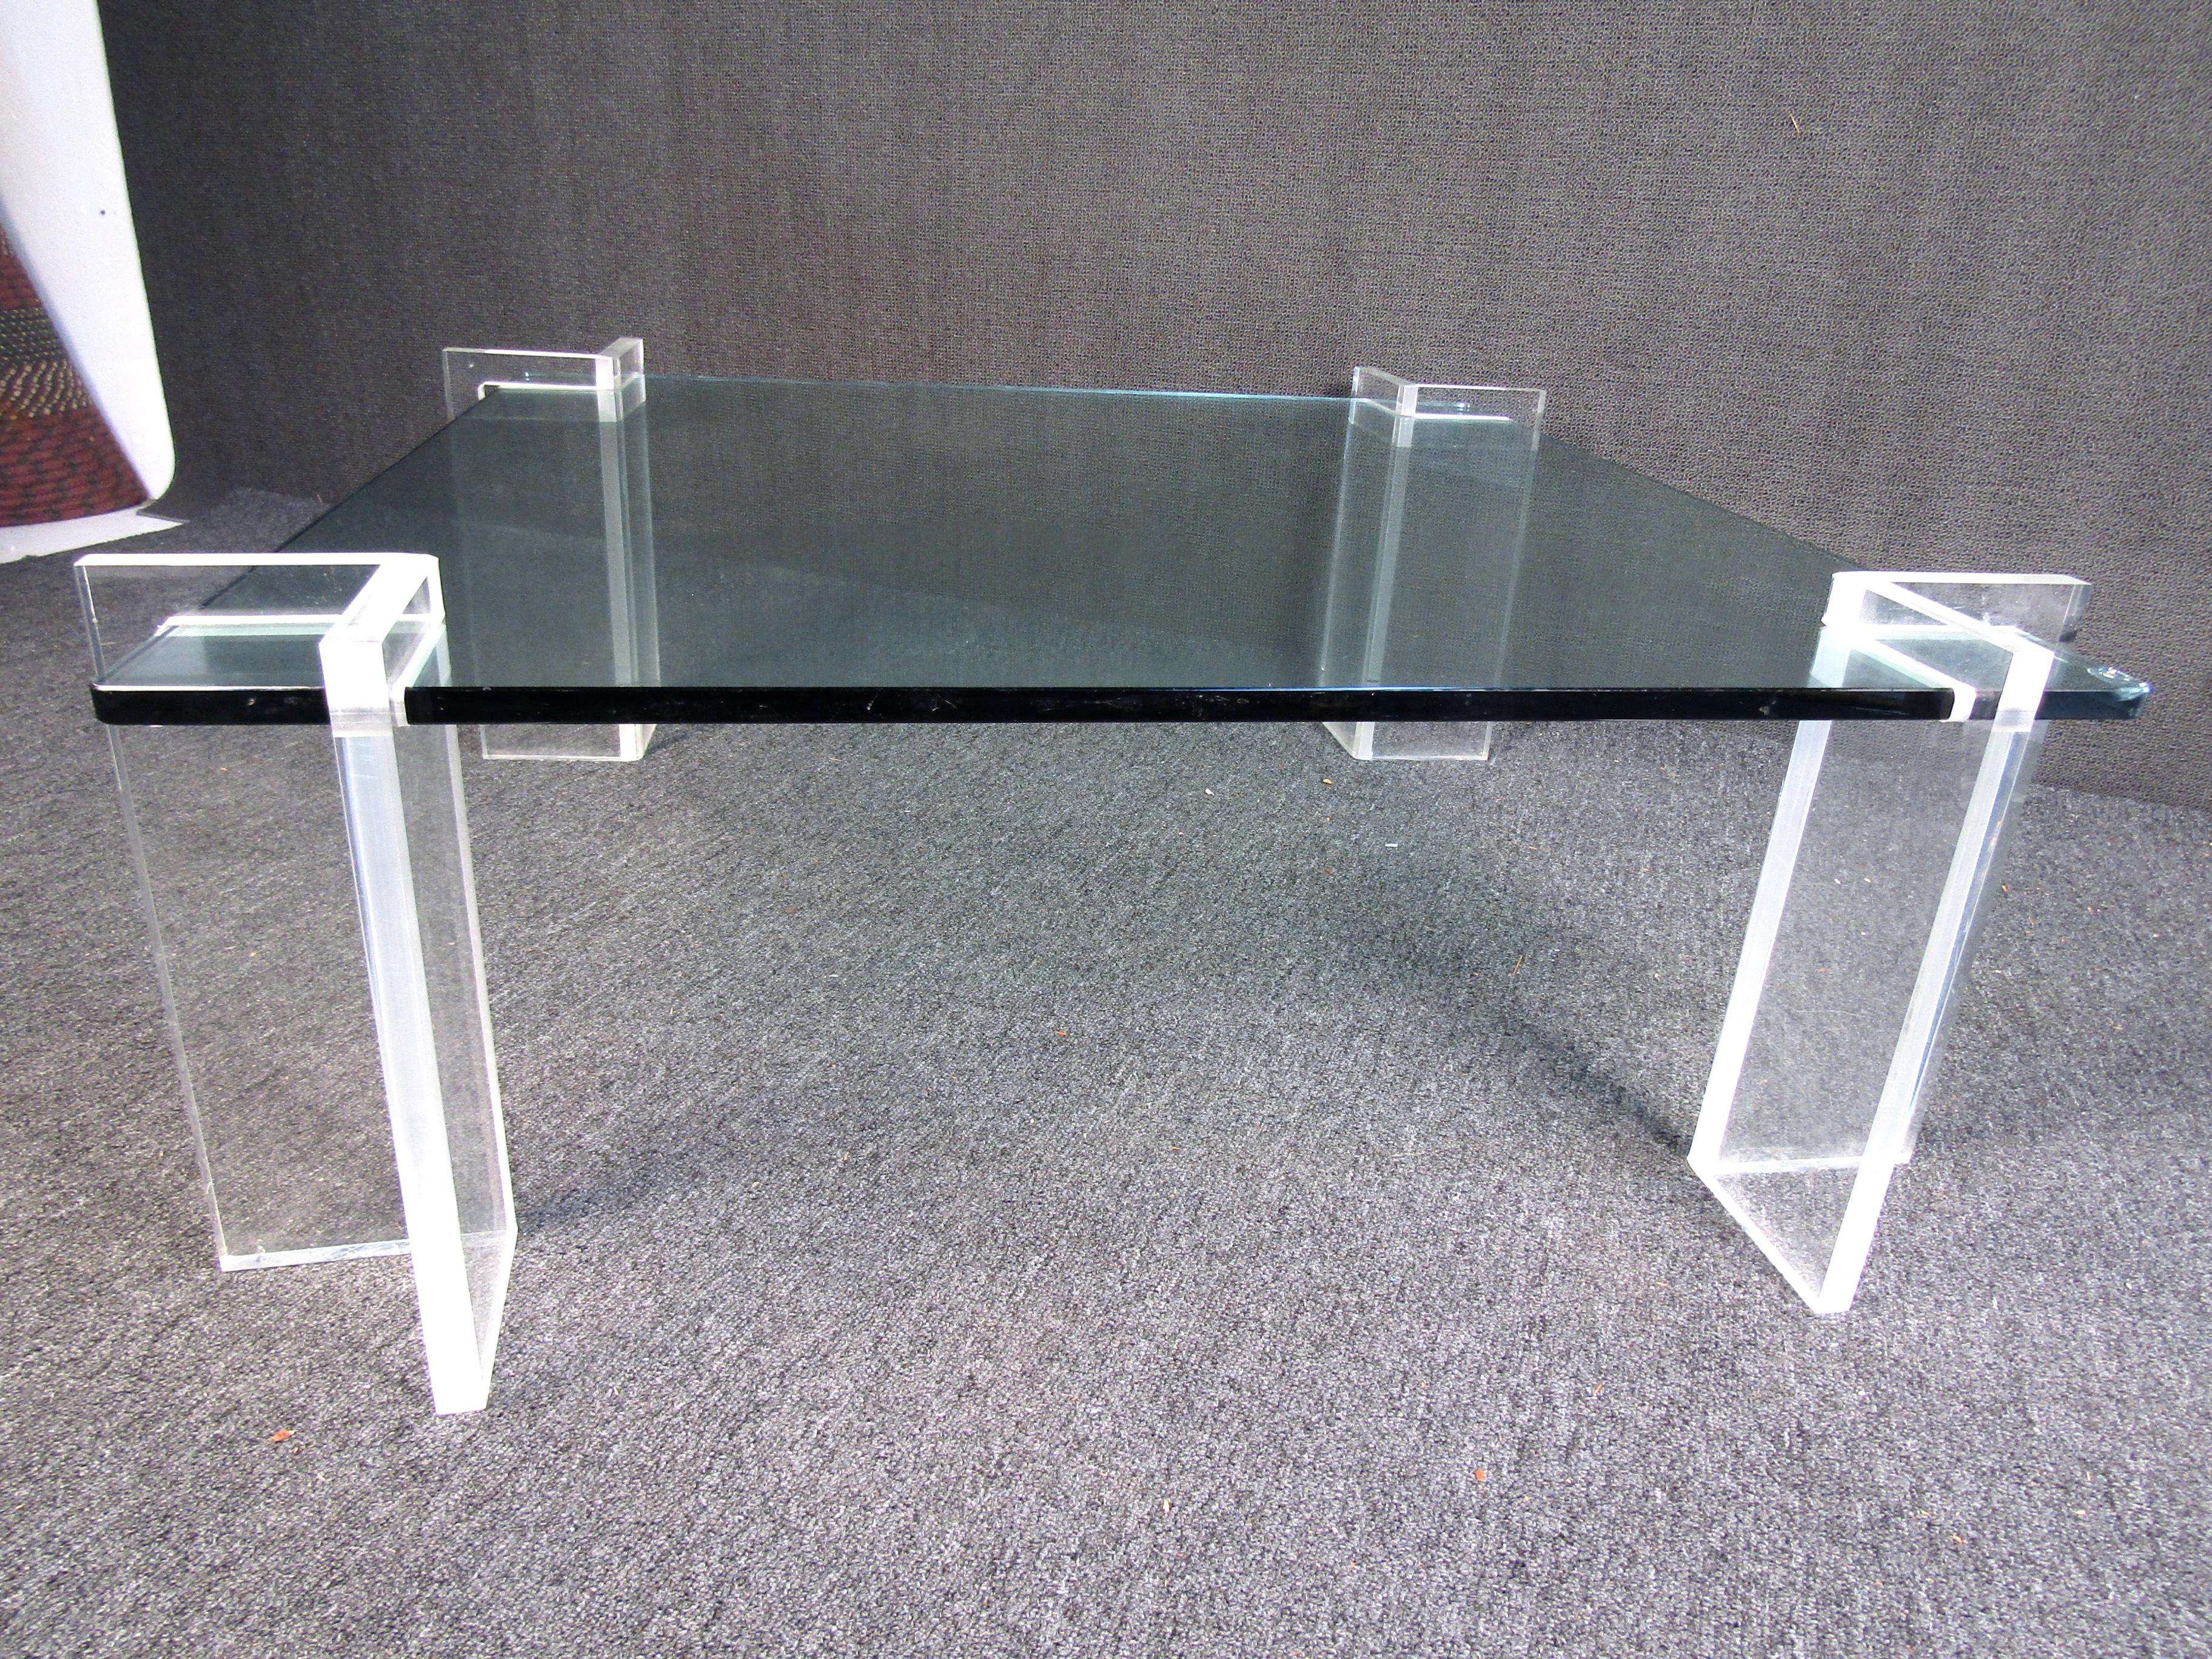 Lucite and glass complement each other strikingly in this eye-catching Mid-Century Modern coffee table. Please confirm item location with seller (NY/NJ).